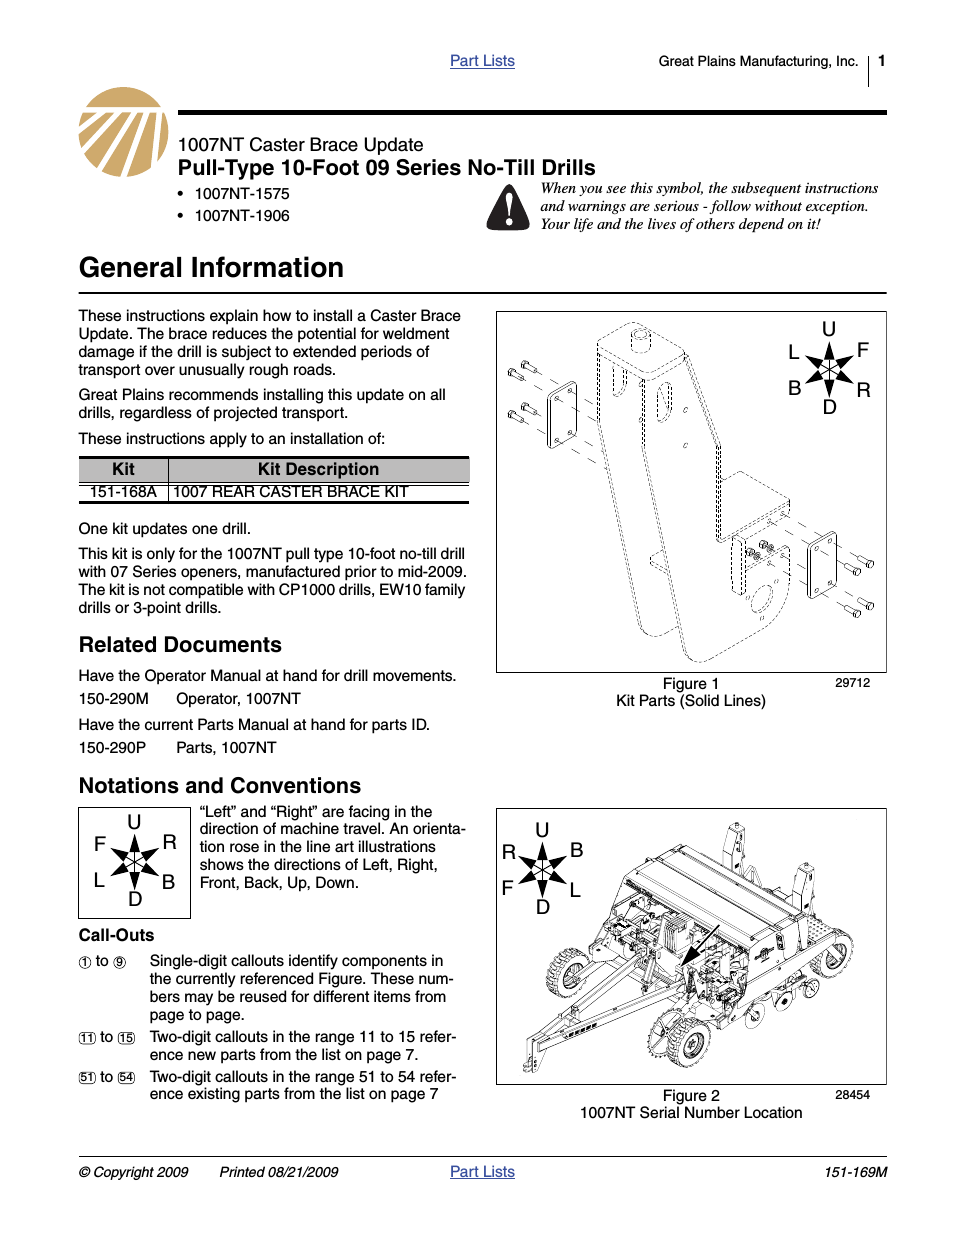 1007NT-1906 Assembly Instructions